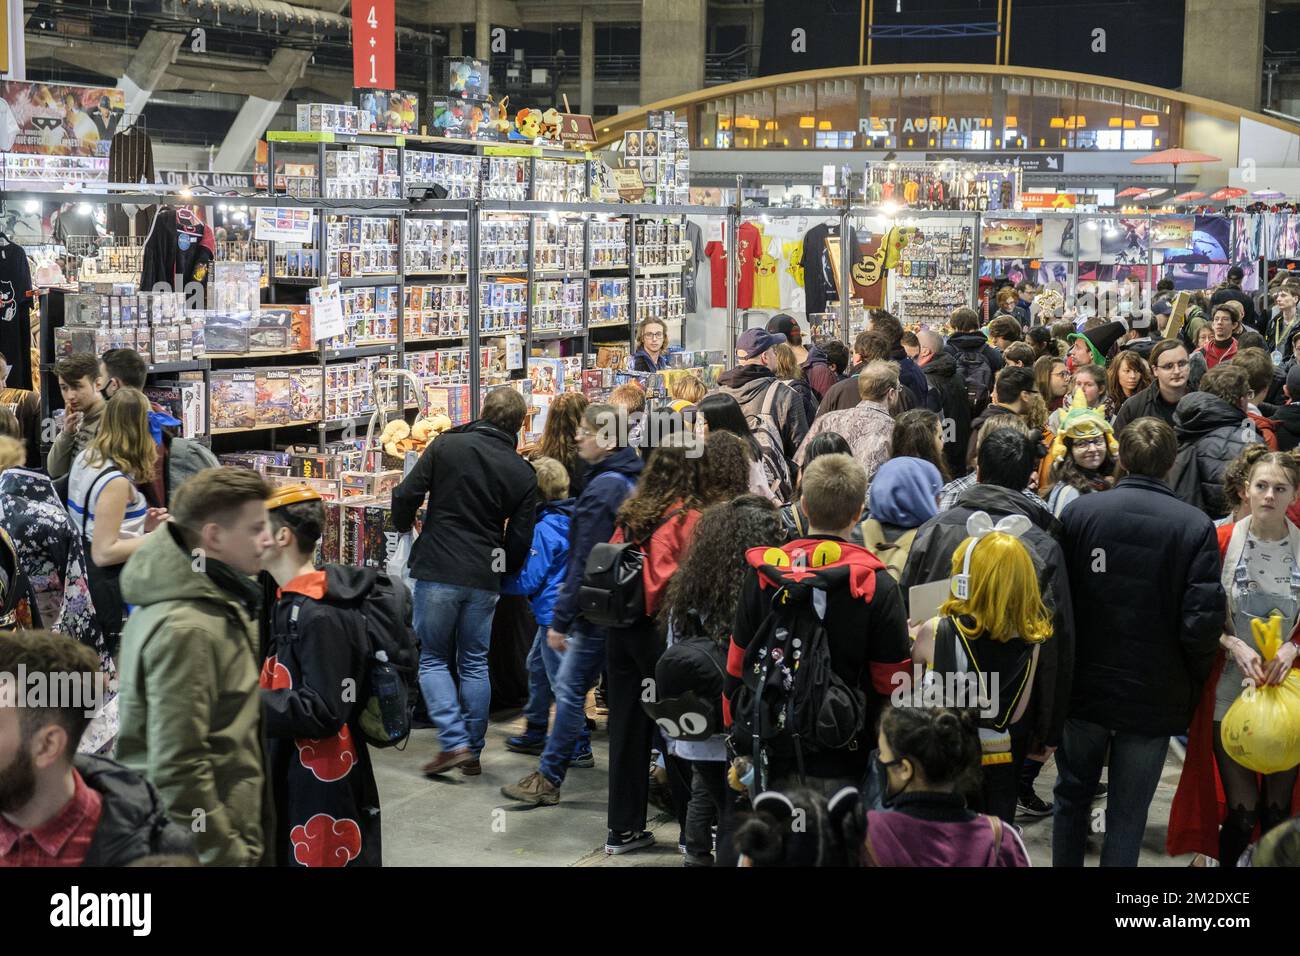 Ninth edition of Made in Asia in Brussels foule dans les allees | Neuvieme edition du salon Made in Asia - crowded alleys 17/03/2018 Stock Photo